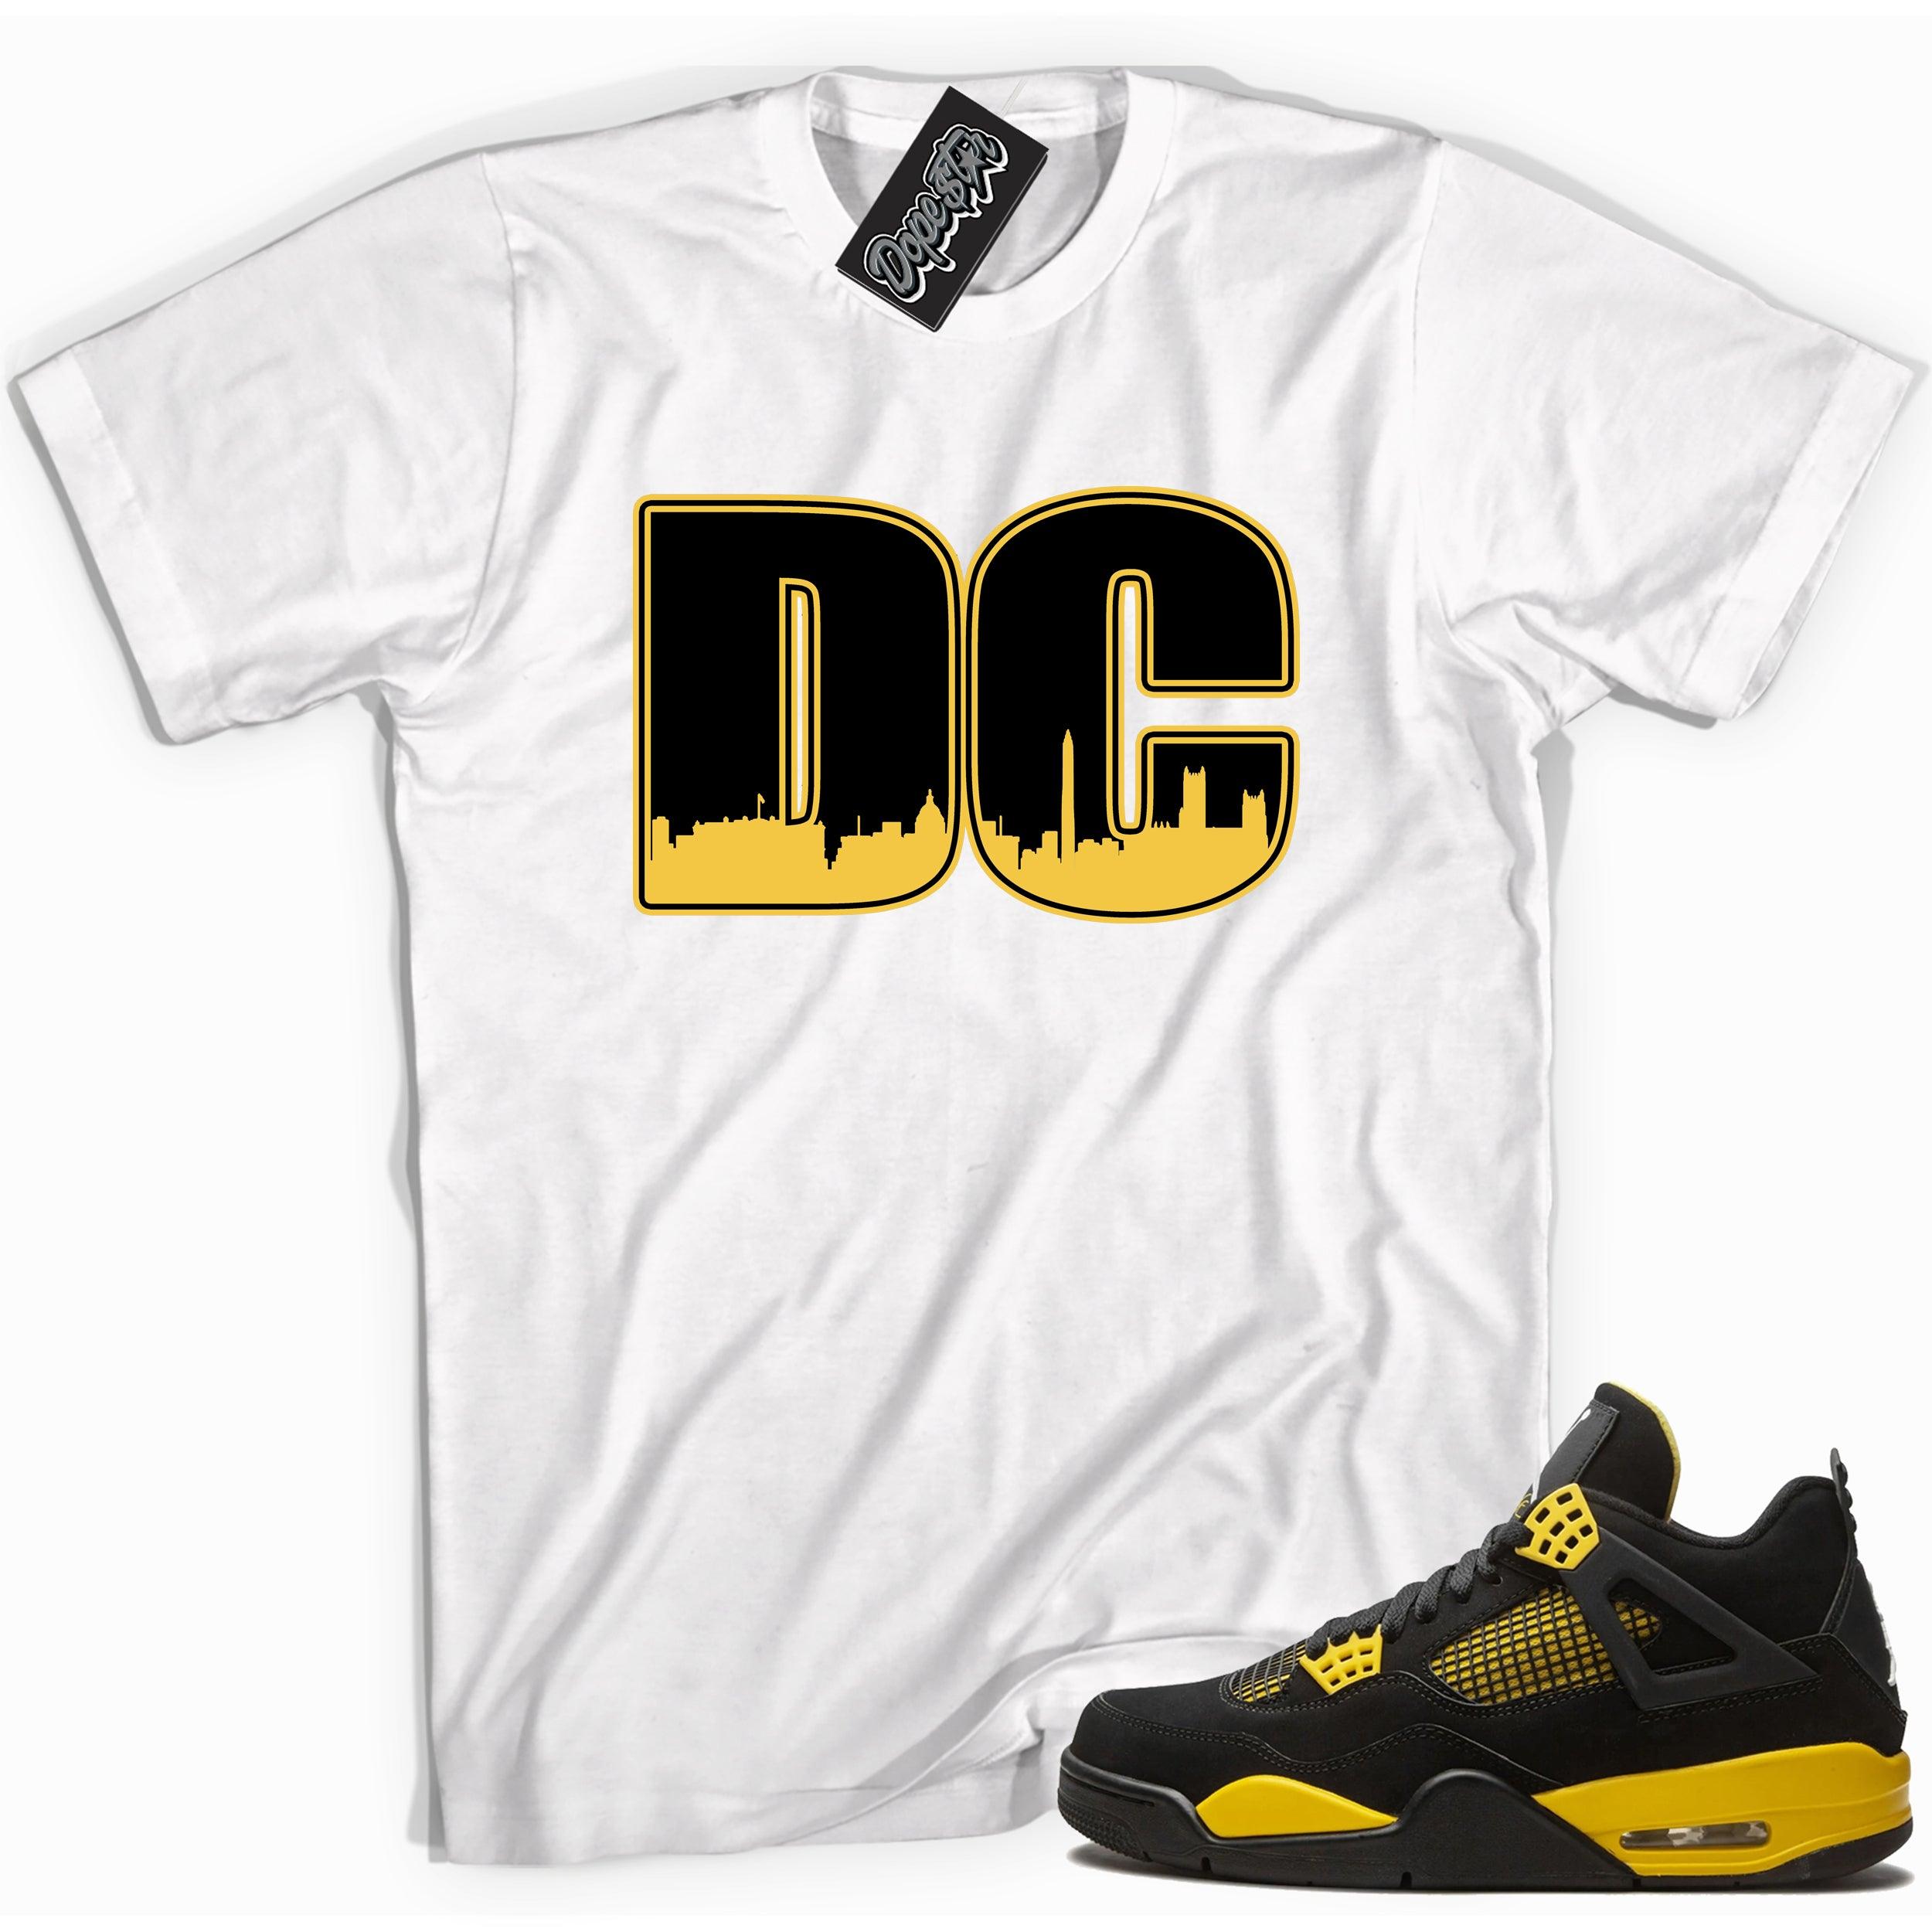 Cool white graphic tee with 'DC' print, that perfectly matches Air Jordan 4 Thunder sneakers